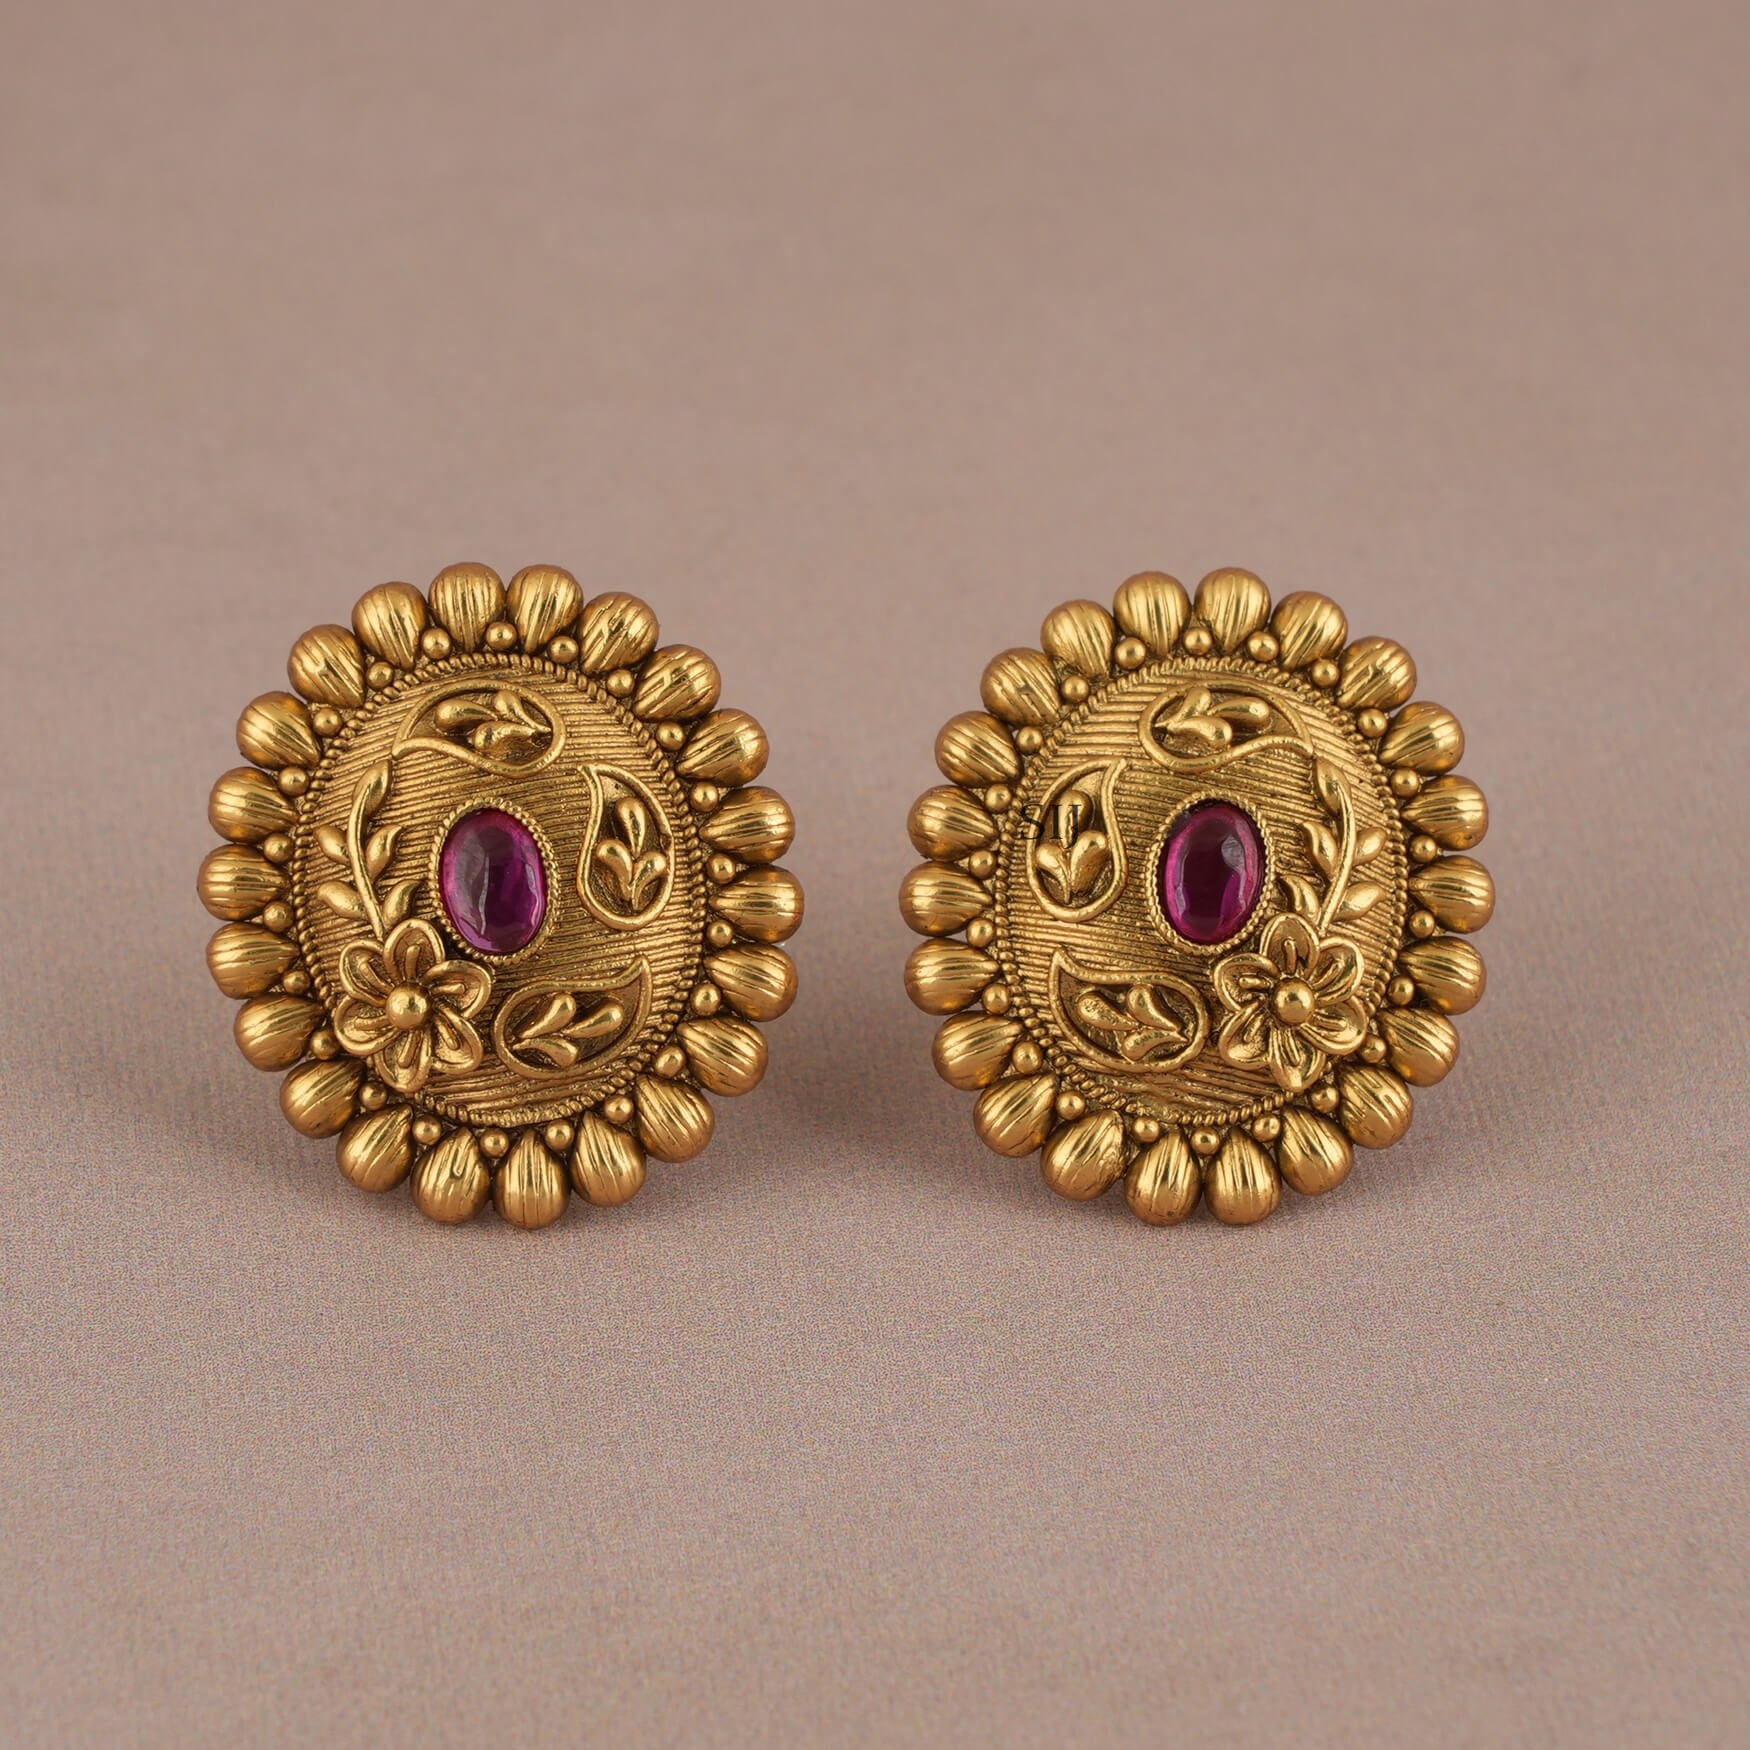 Stunning Gold Floral Oval Shaped Ruby Stone Studs